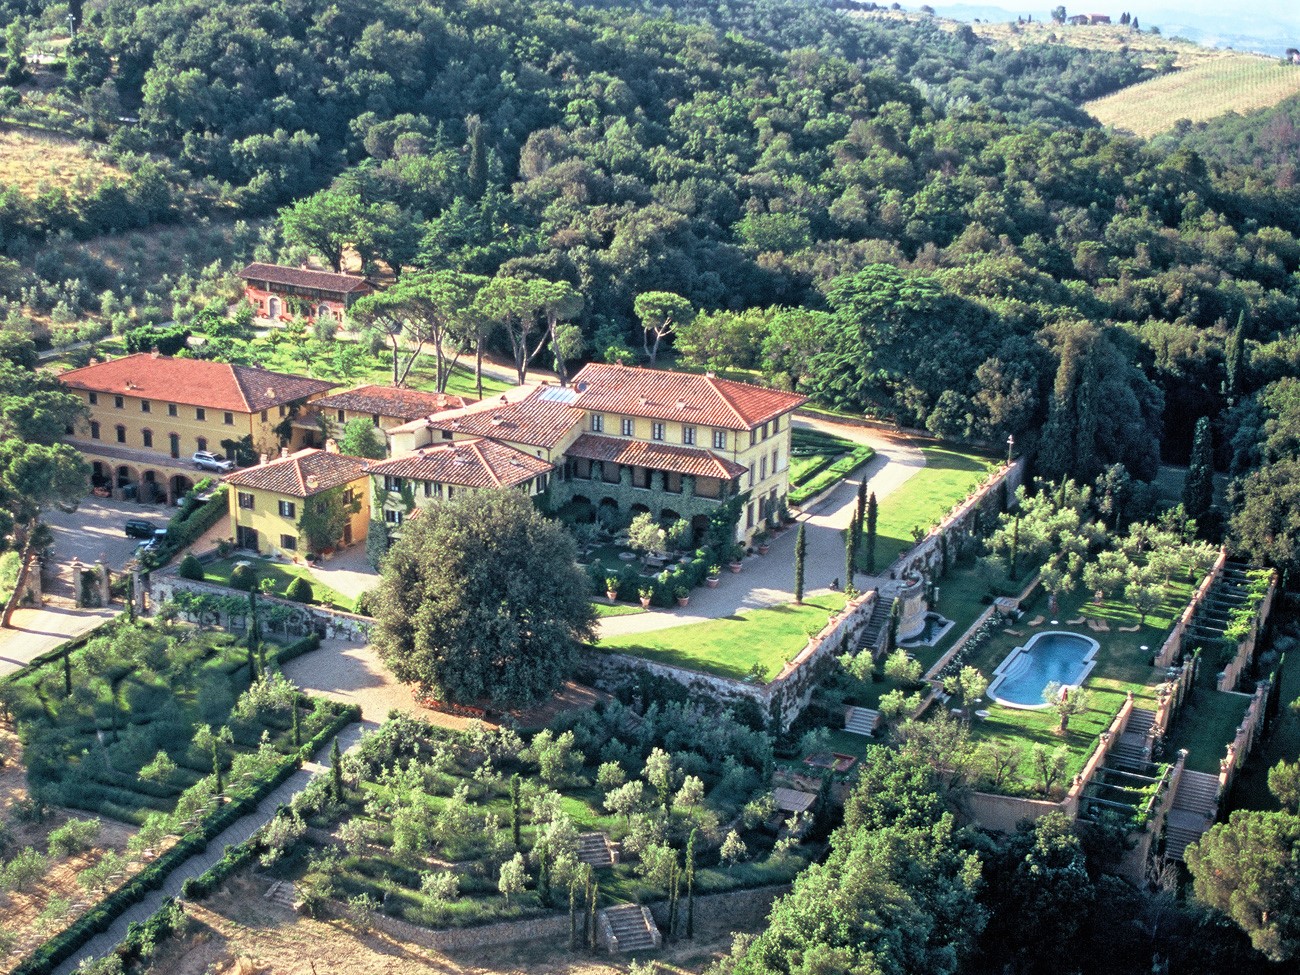 Tie the knot at Sting's villa in Tuscany Framille Weddings